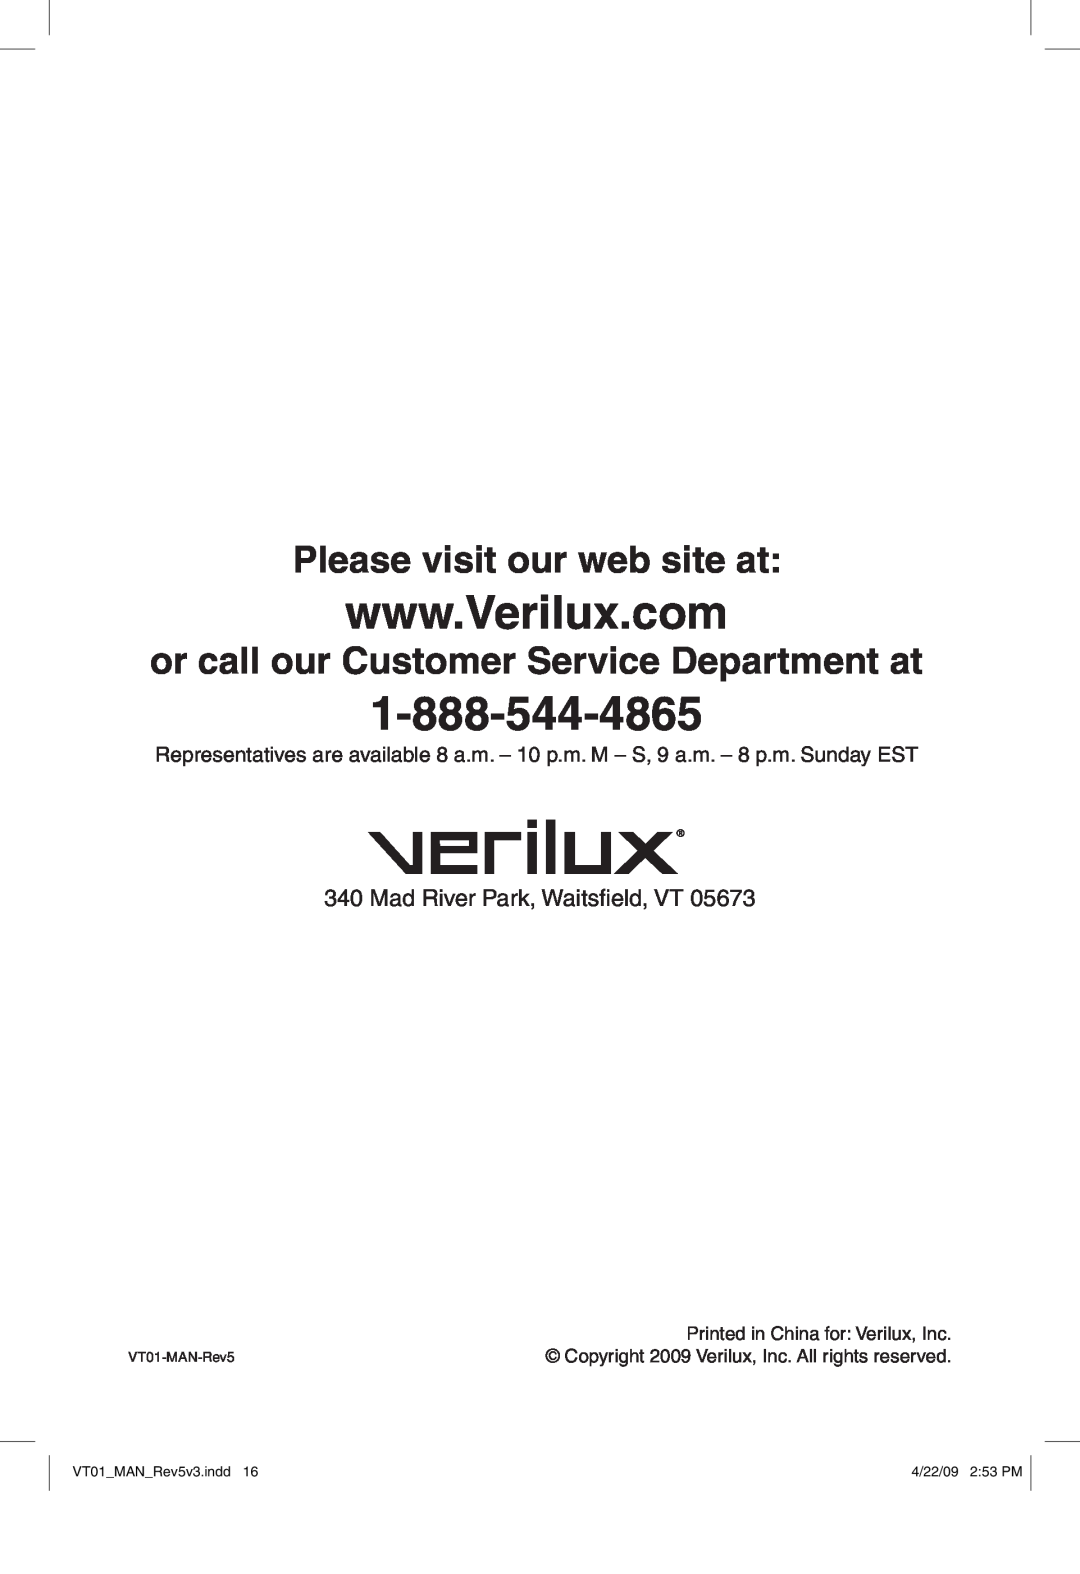 Verilux VT01 manual Please visit our web site at, or call our Customer Service Department at 